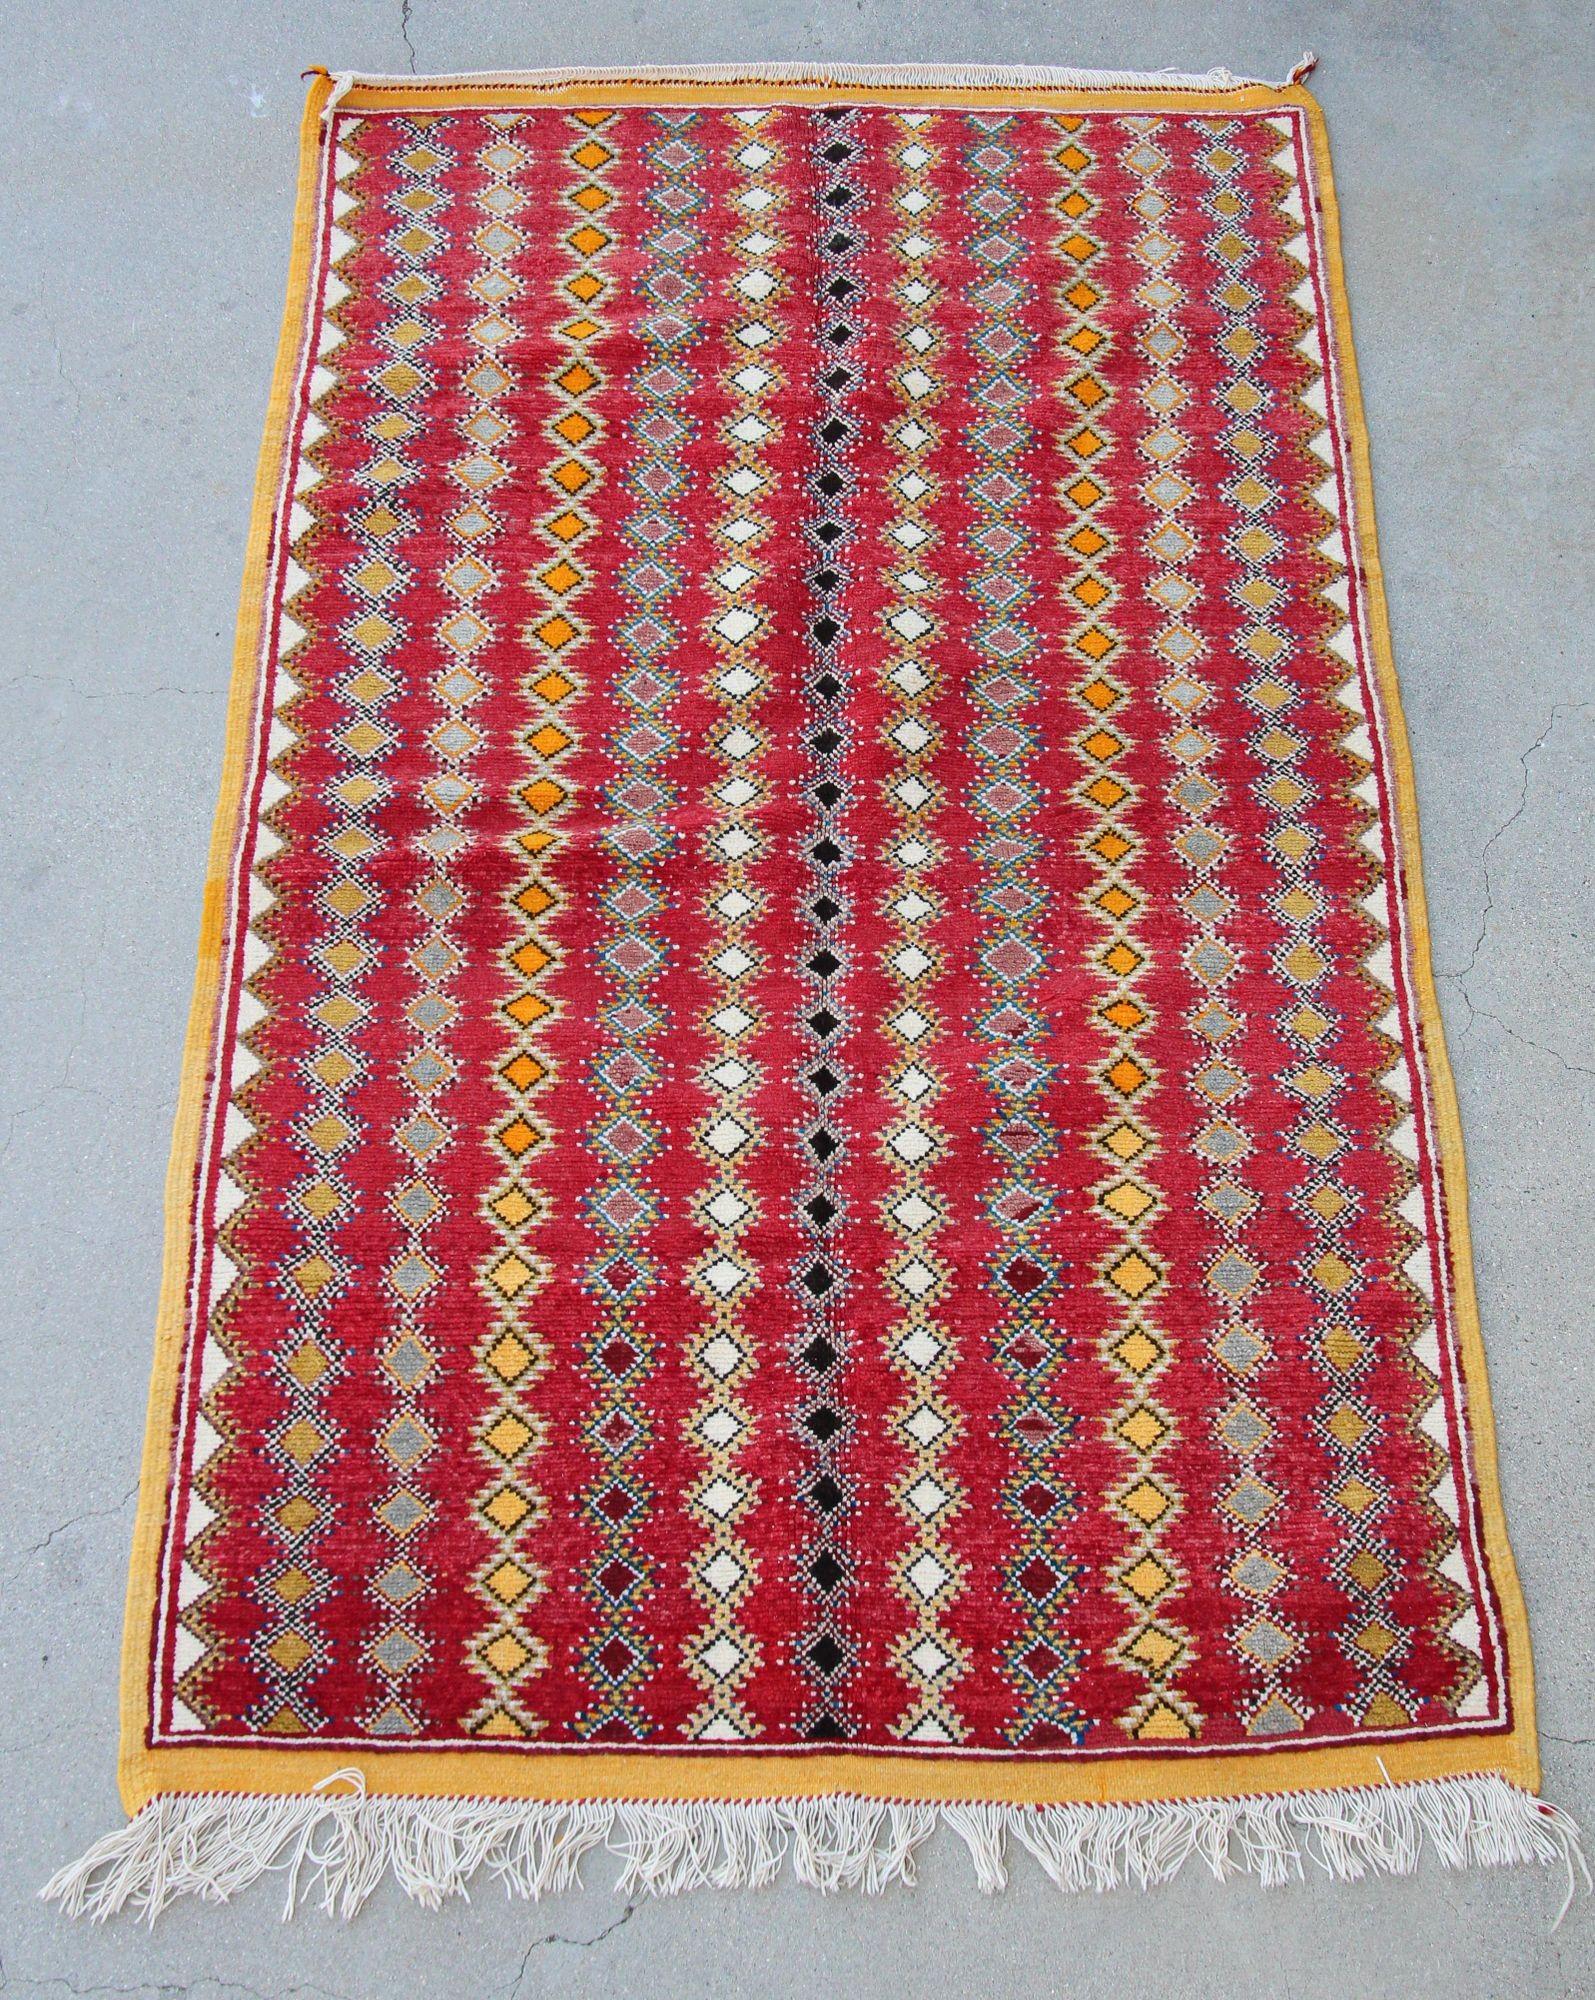 1980s Vintage Moroccan Boujad Hand-Woven Tribal Rug In Good Condition For Sale In North Hollywood, CA